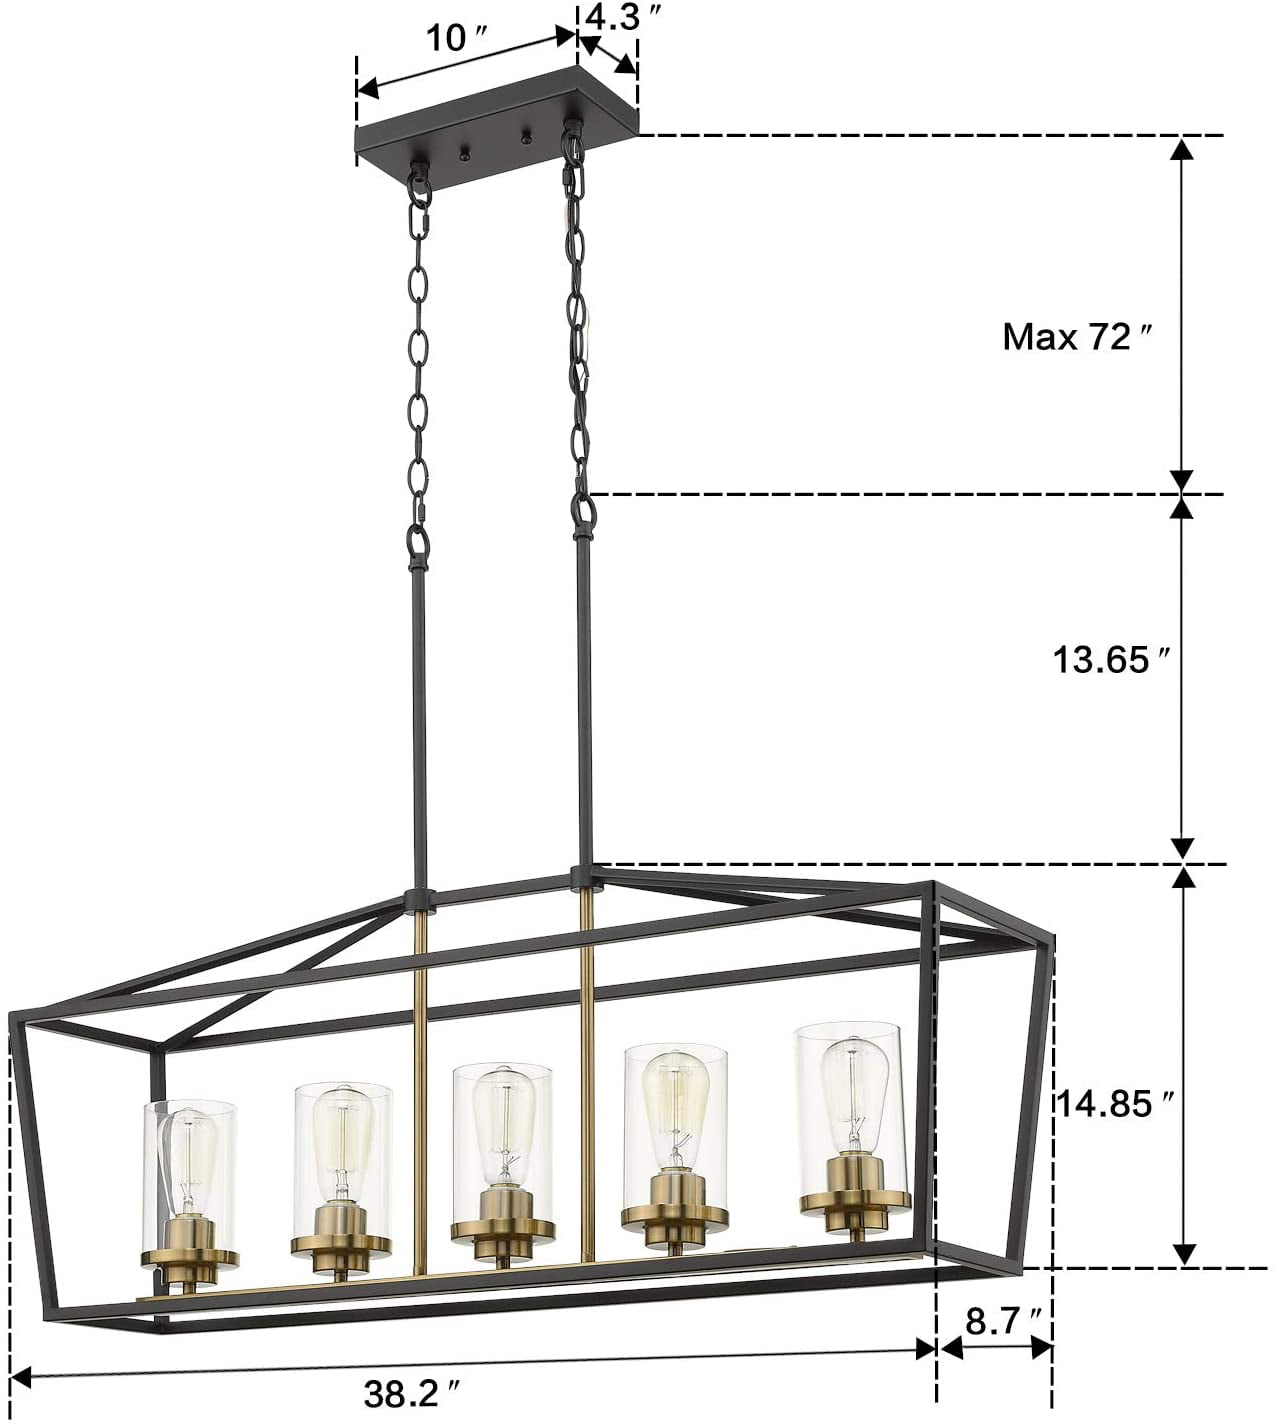 Oil Rubbed Bronze Finish with Clear Glass Shade Emliviar 5-Light Kitchen Island Lighting 2074LP ORB Modern Domestic Linear Pendant Light Fixture